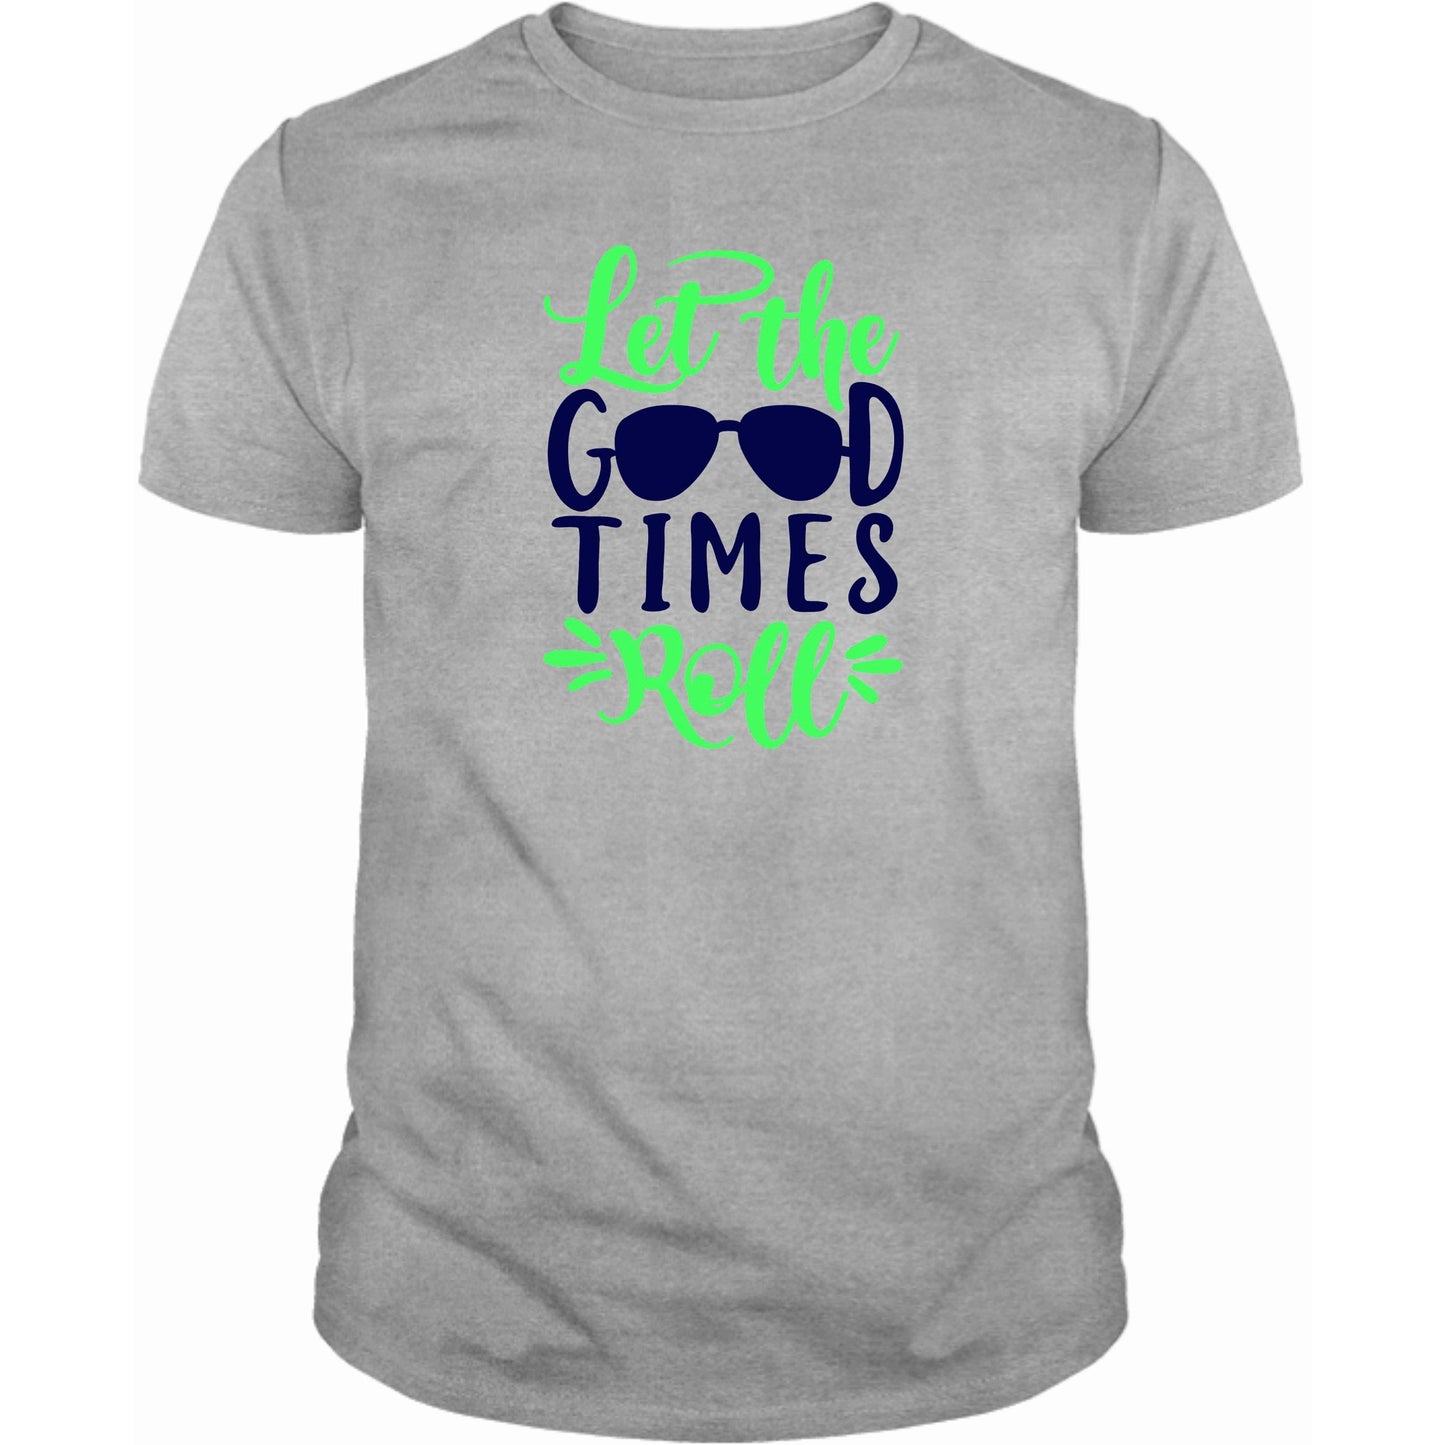 Let the good Times Roll T-Shirt